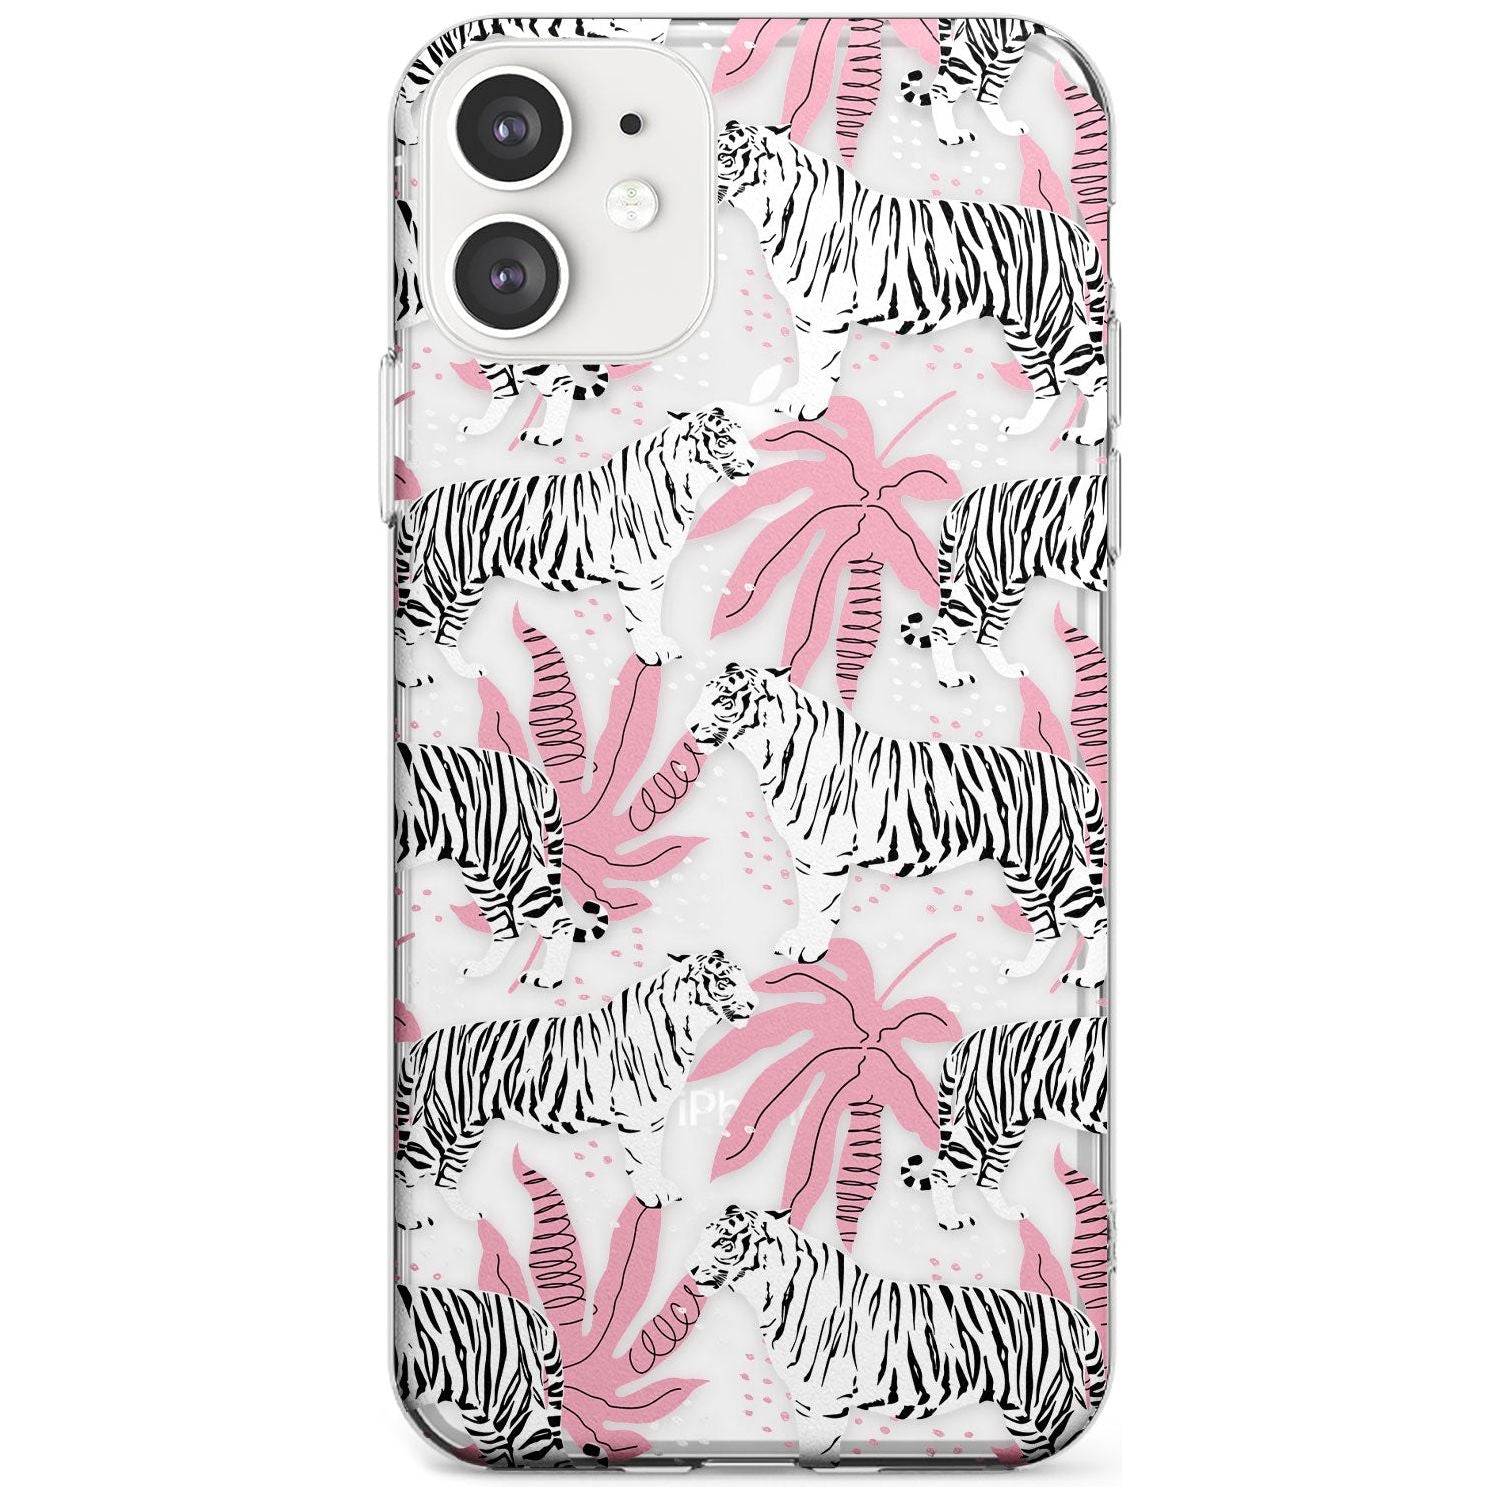 Tigers Within Slim TPU Phone Case for iPhone 11